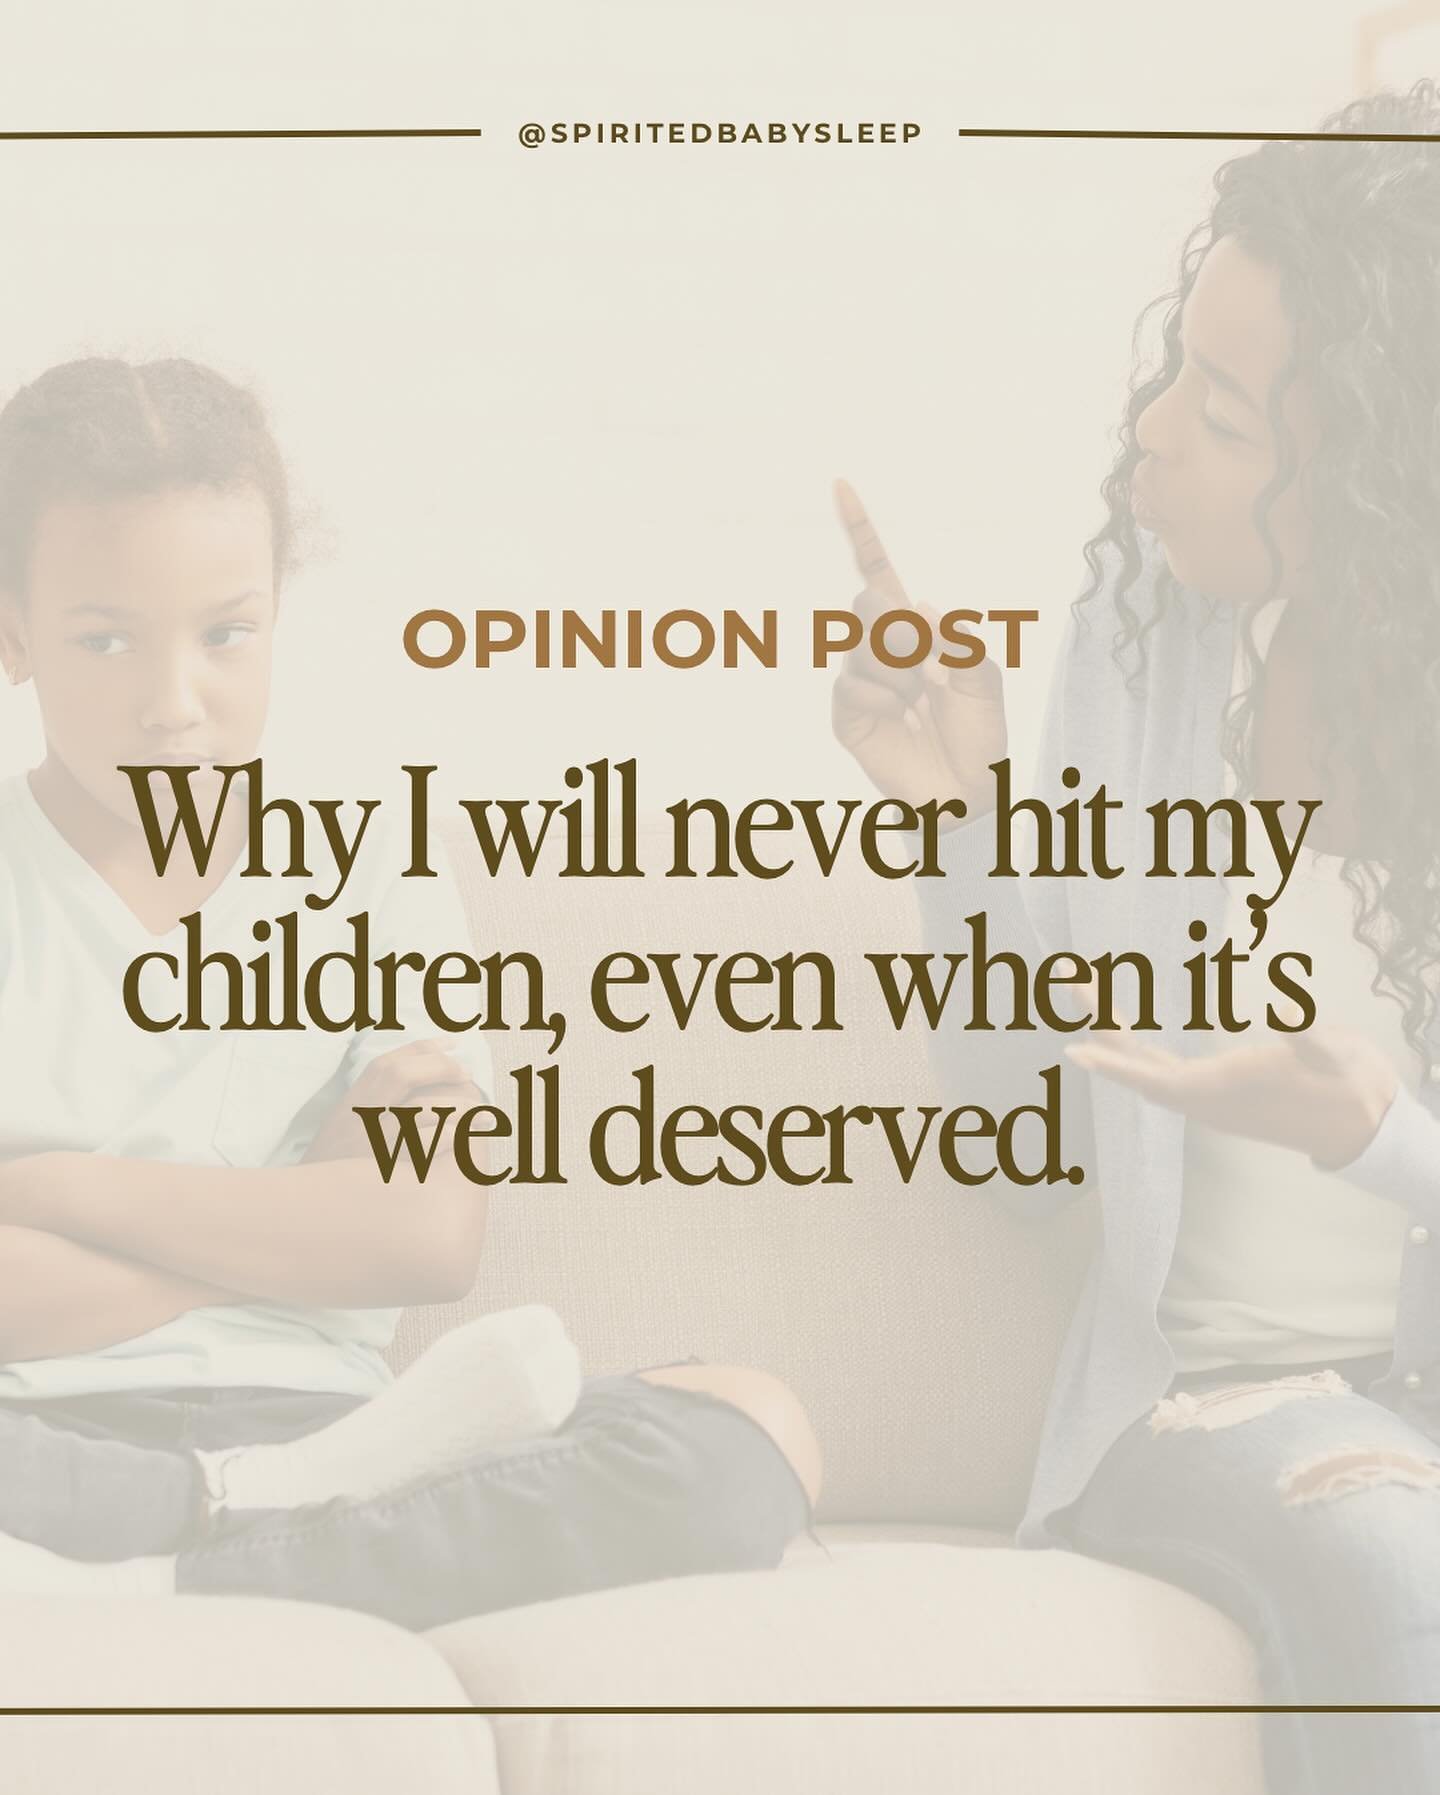 Spanking, smacking, or slapping a child doesn&rsquo;t have the positive effects some people claim it does. It often results in fear, not empathy. 

Corporal punishment can teach children to obey out of fear of punishment, not because they understand 